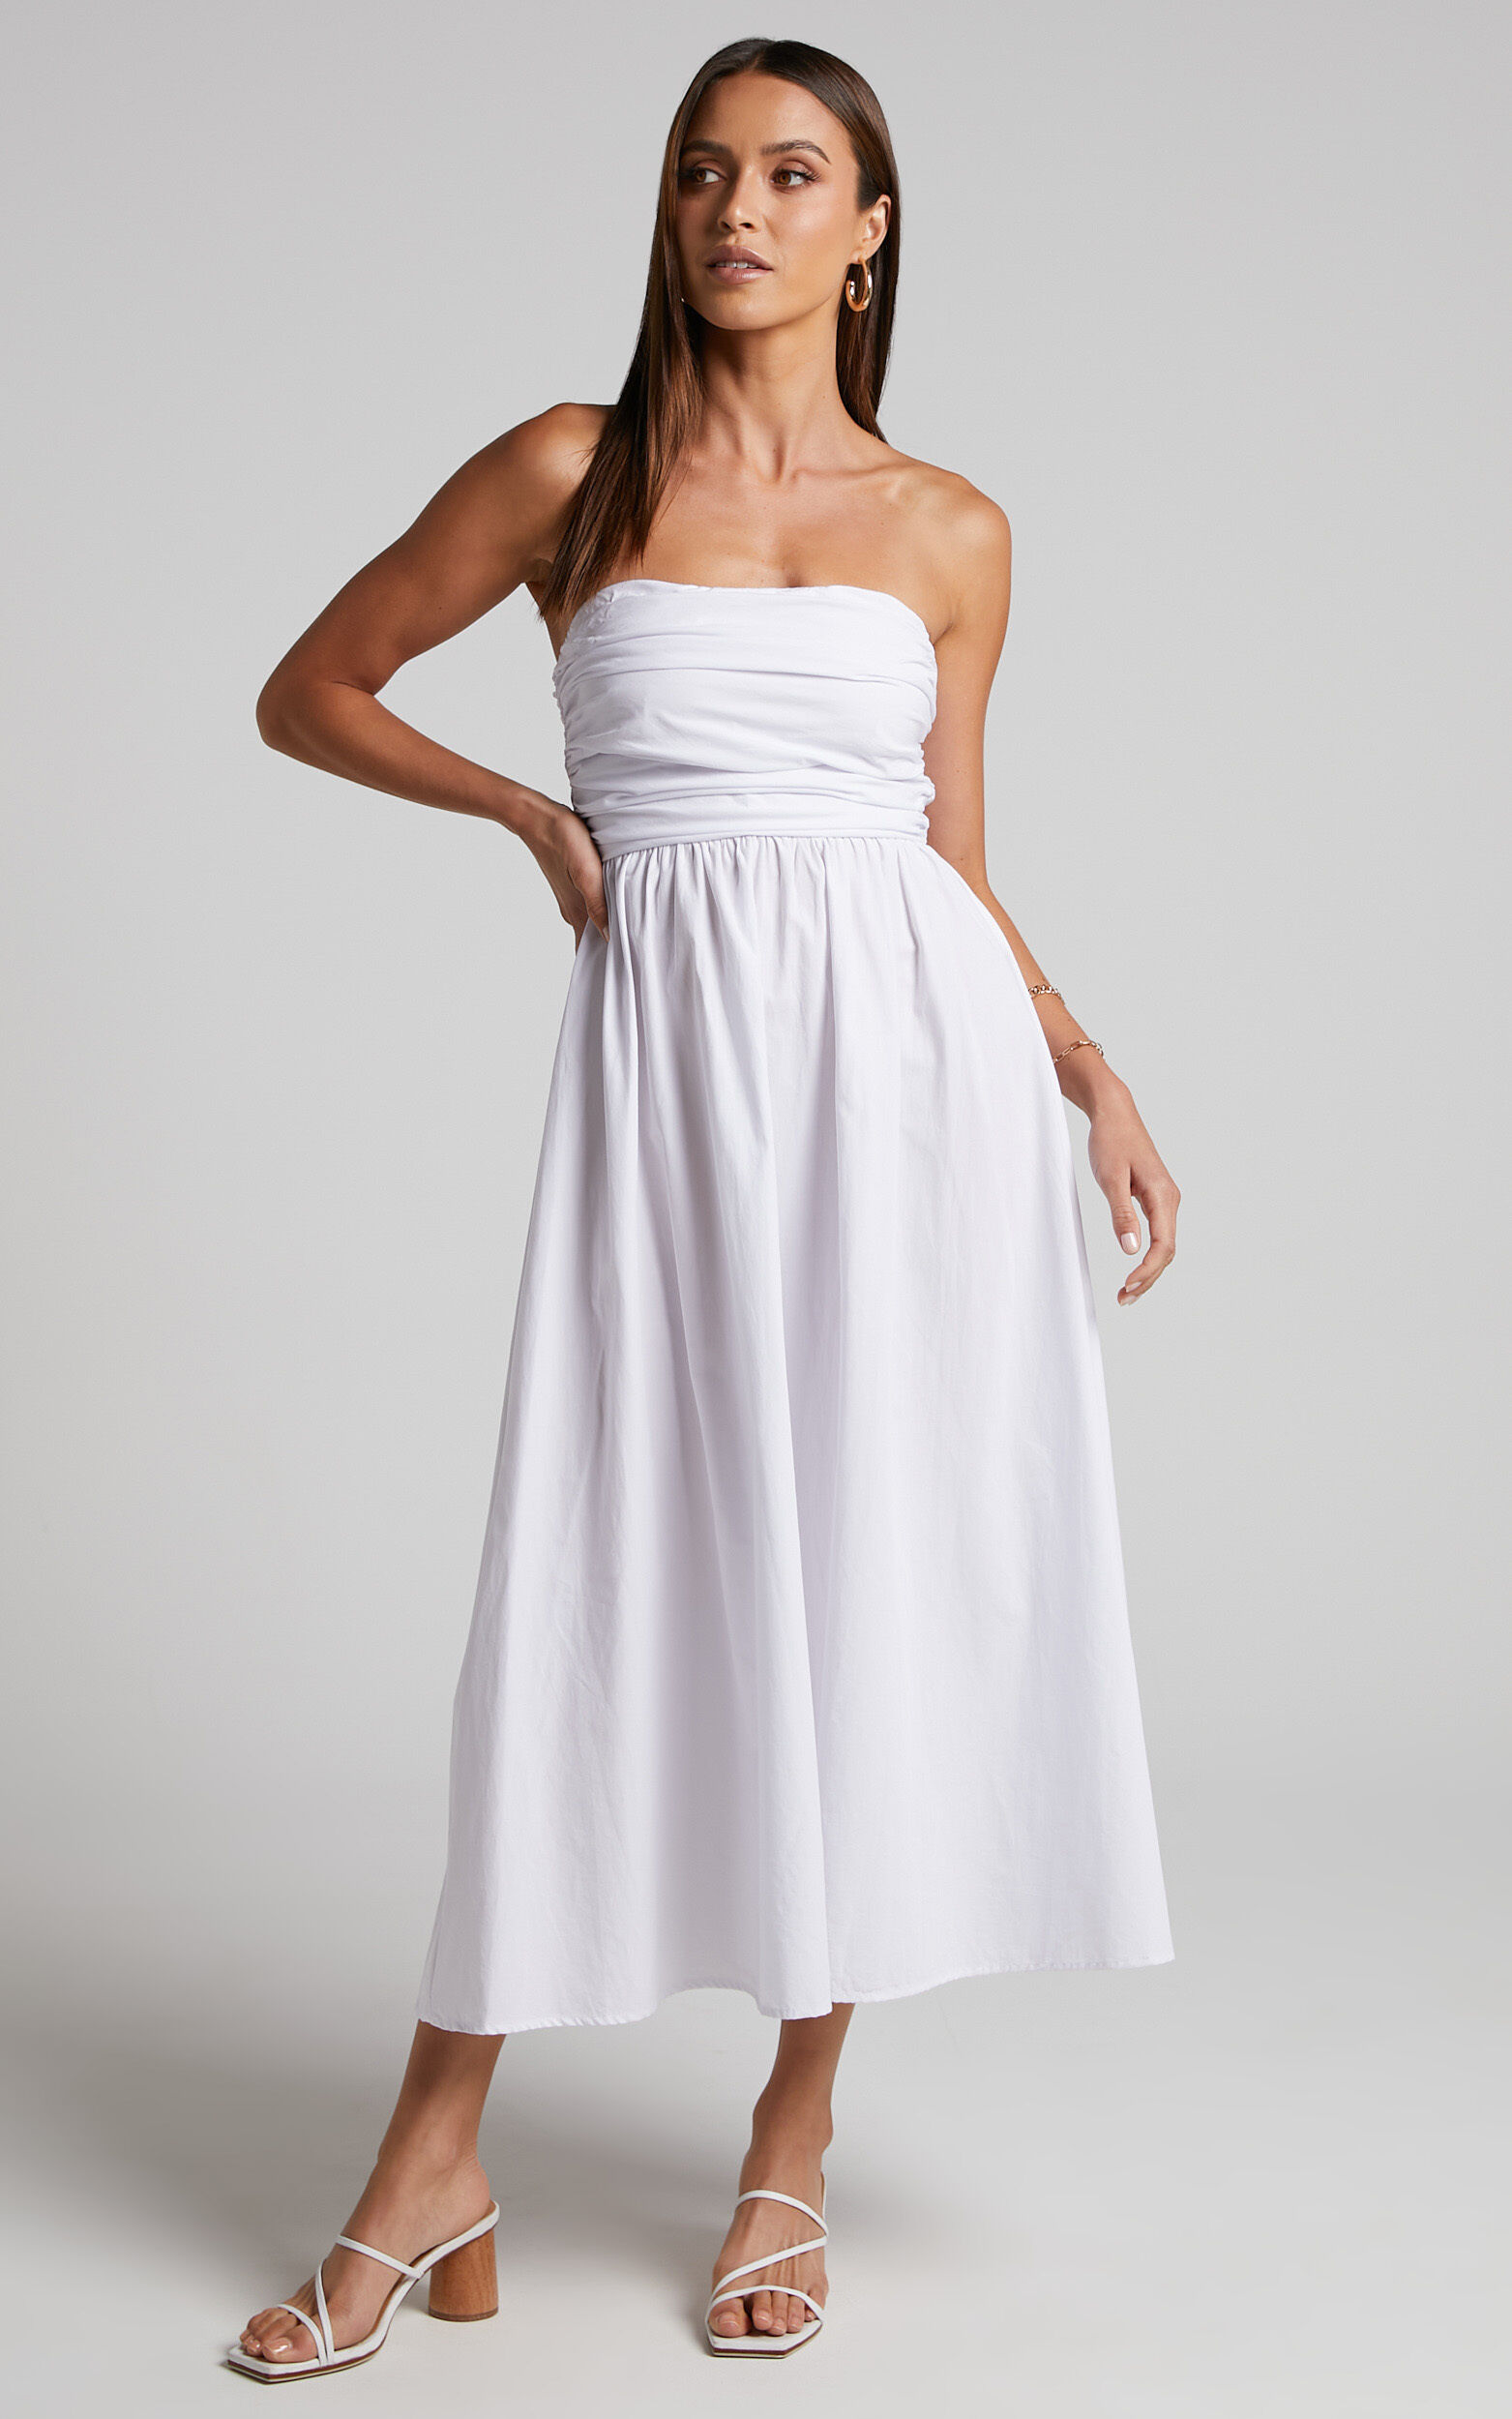 Sula Midi Dress - Ruched Bust Strapless Dress in White - 06, WHT1